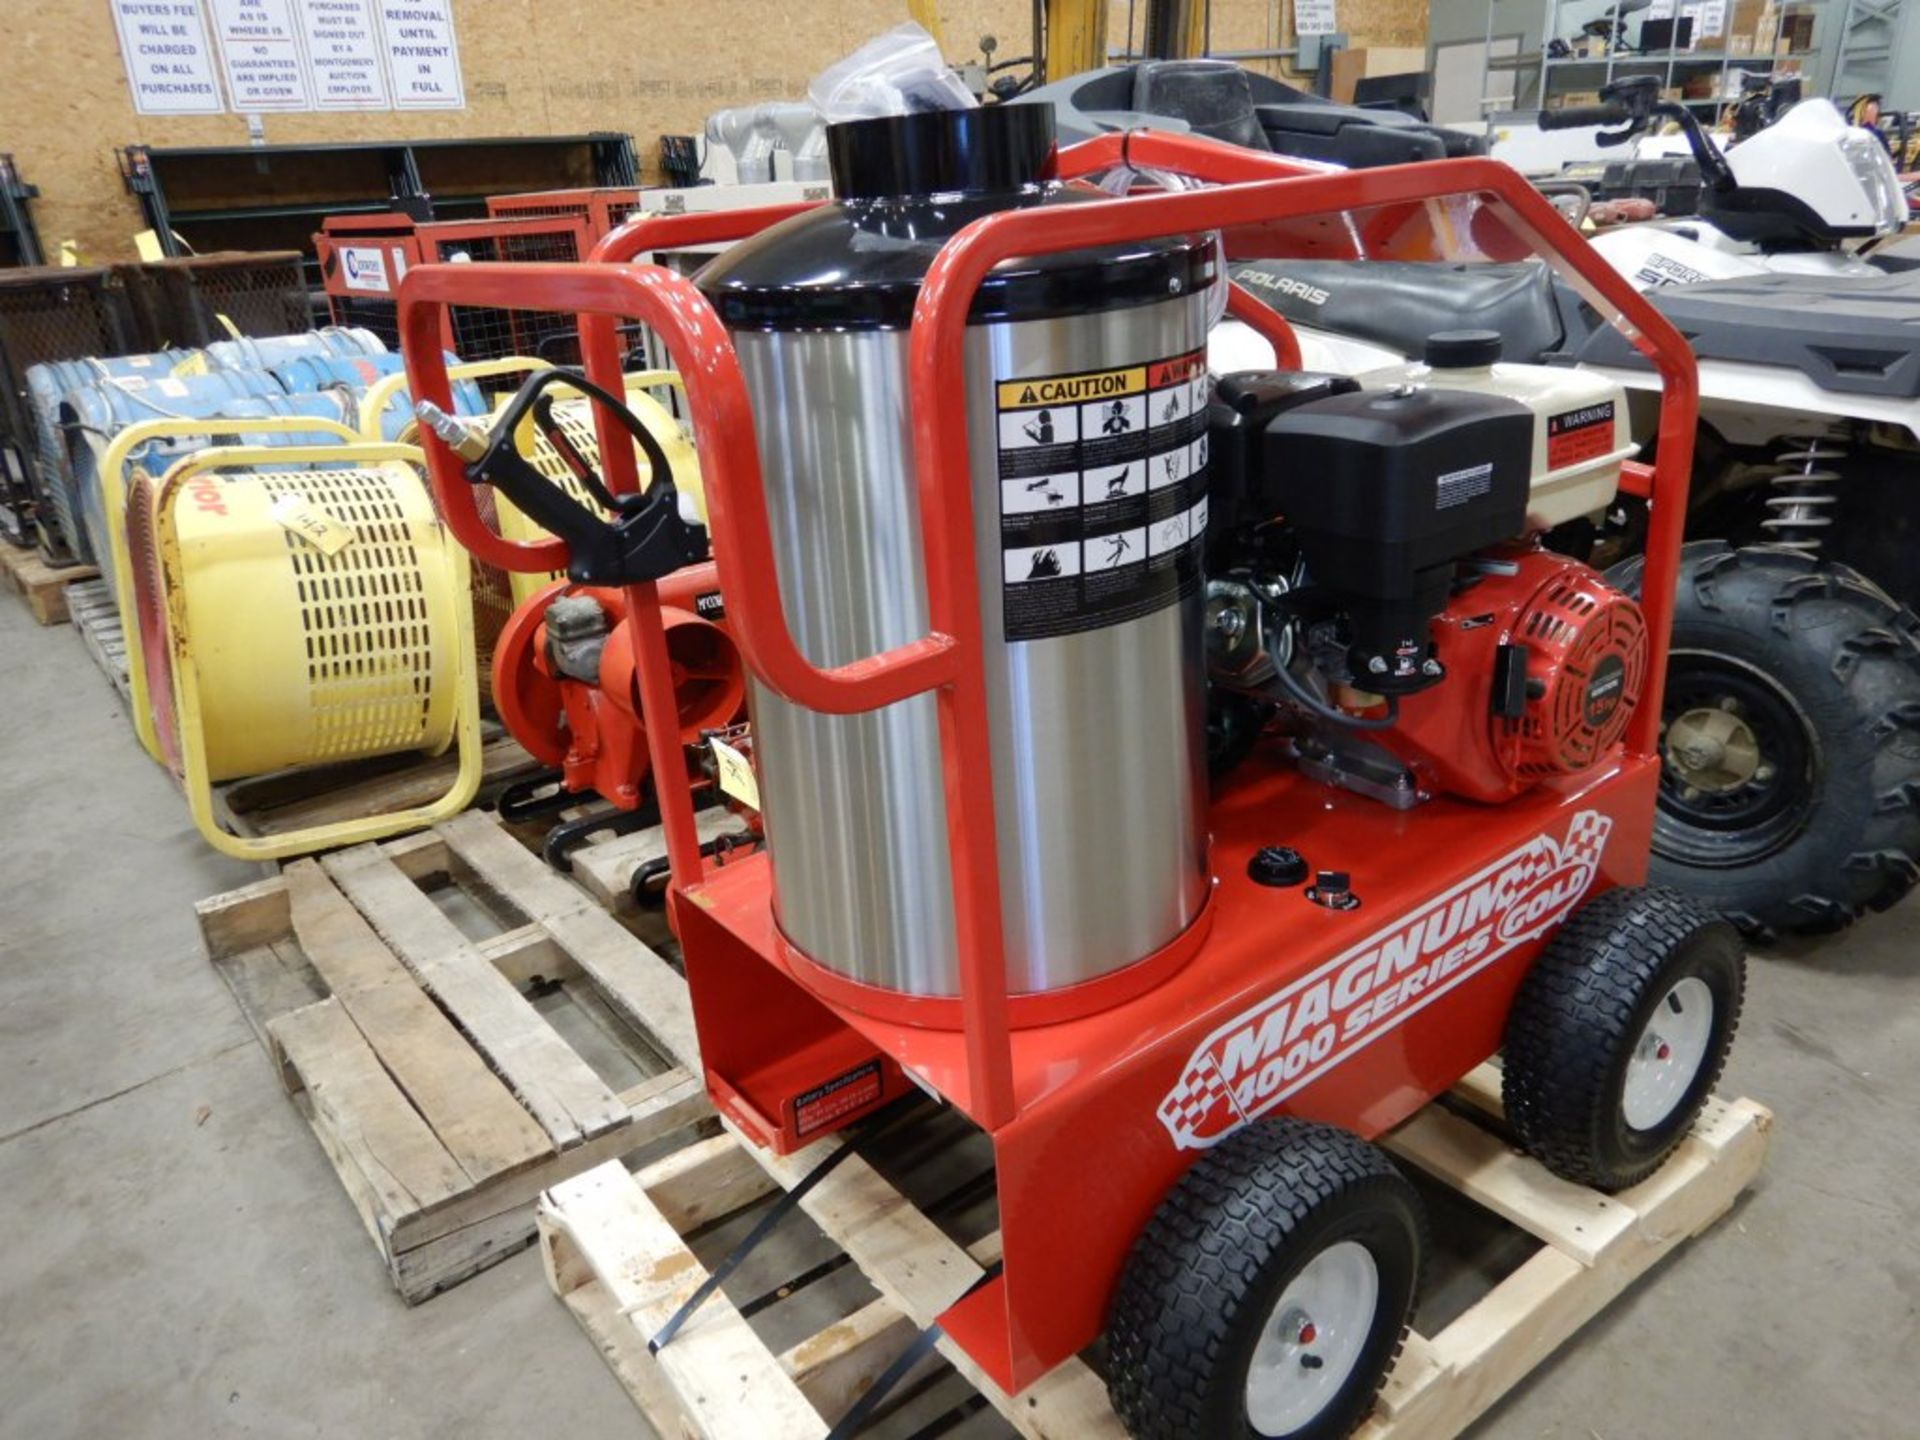 EASY KLEEN MAGNUM 4000 GOLD HOT WATER PRESSURE WASHER W/15HP ENGINE & ACCESSORIES, NEW IN CRATE S/ - Image 3 of 4